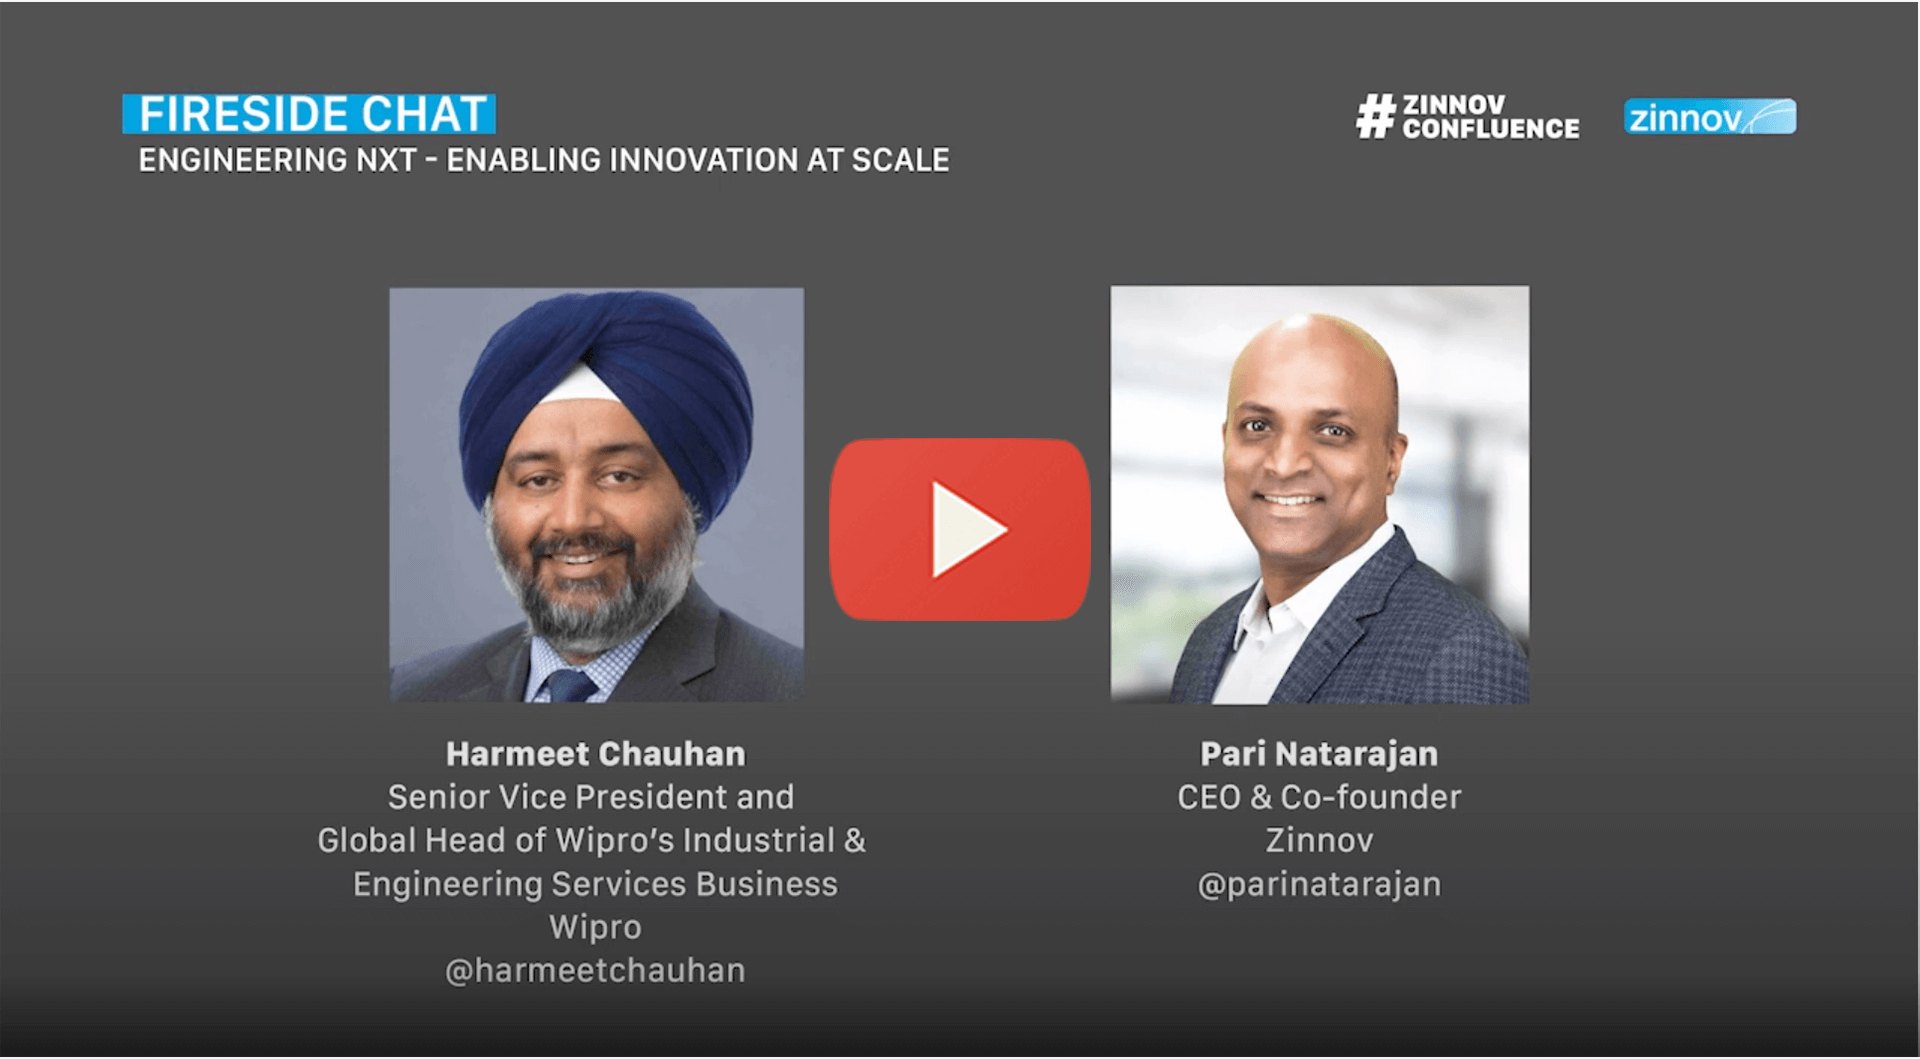 Fireside Chat | EngineeringNXT - Enabling Innovation At Scale | Zinnov Confluence